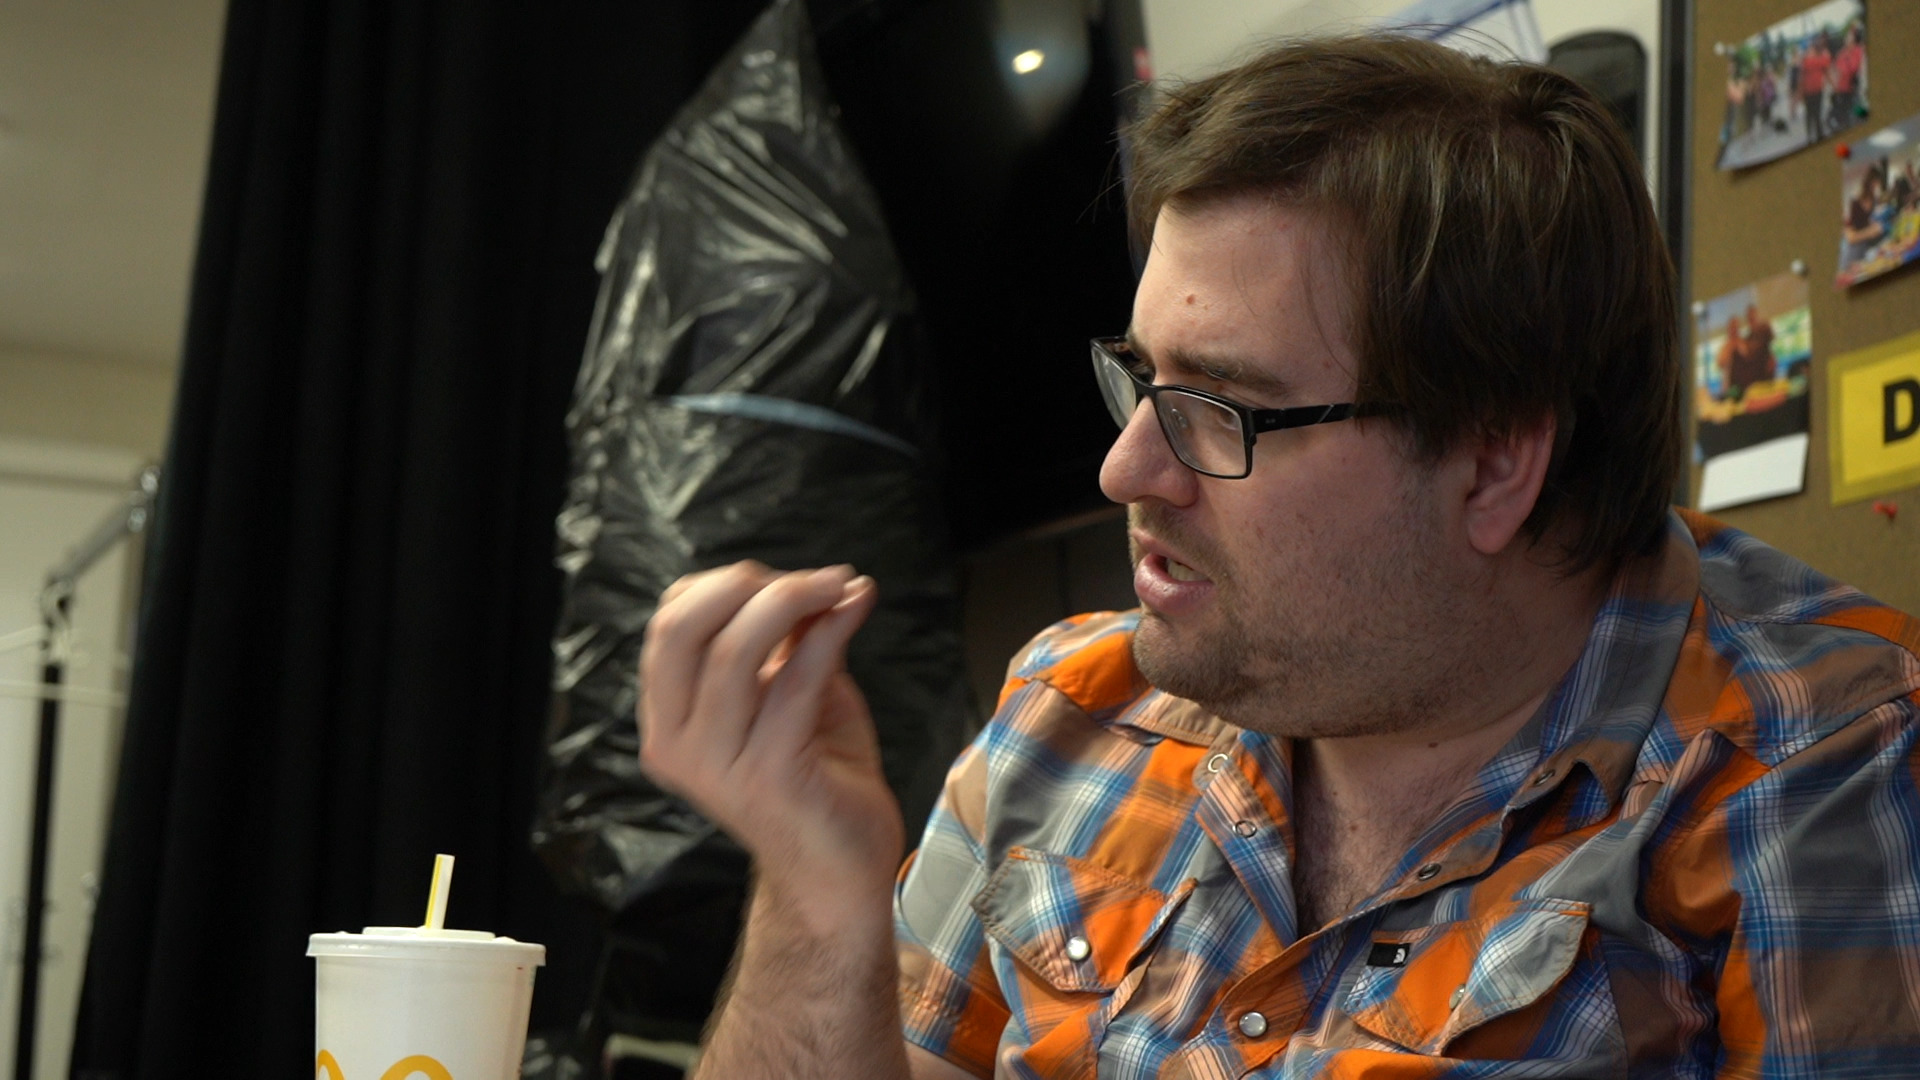 Michael, a white man in his early 30s wearing a plaid orange and blue shirt and black glasses, signs while sitting at a table. A disposable drink cup sits in front of him, and a cork board with photos pinned to itis in the background